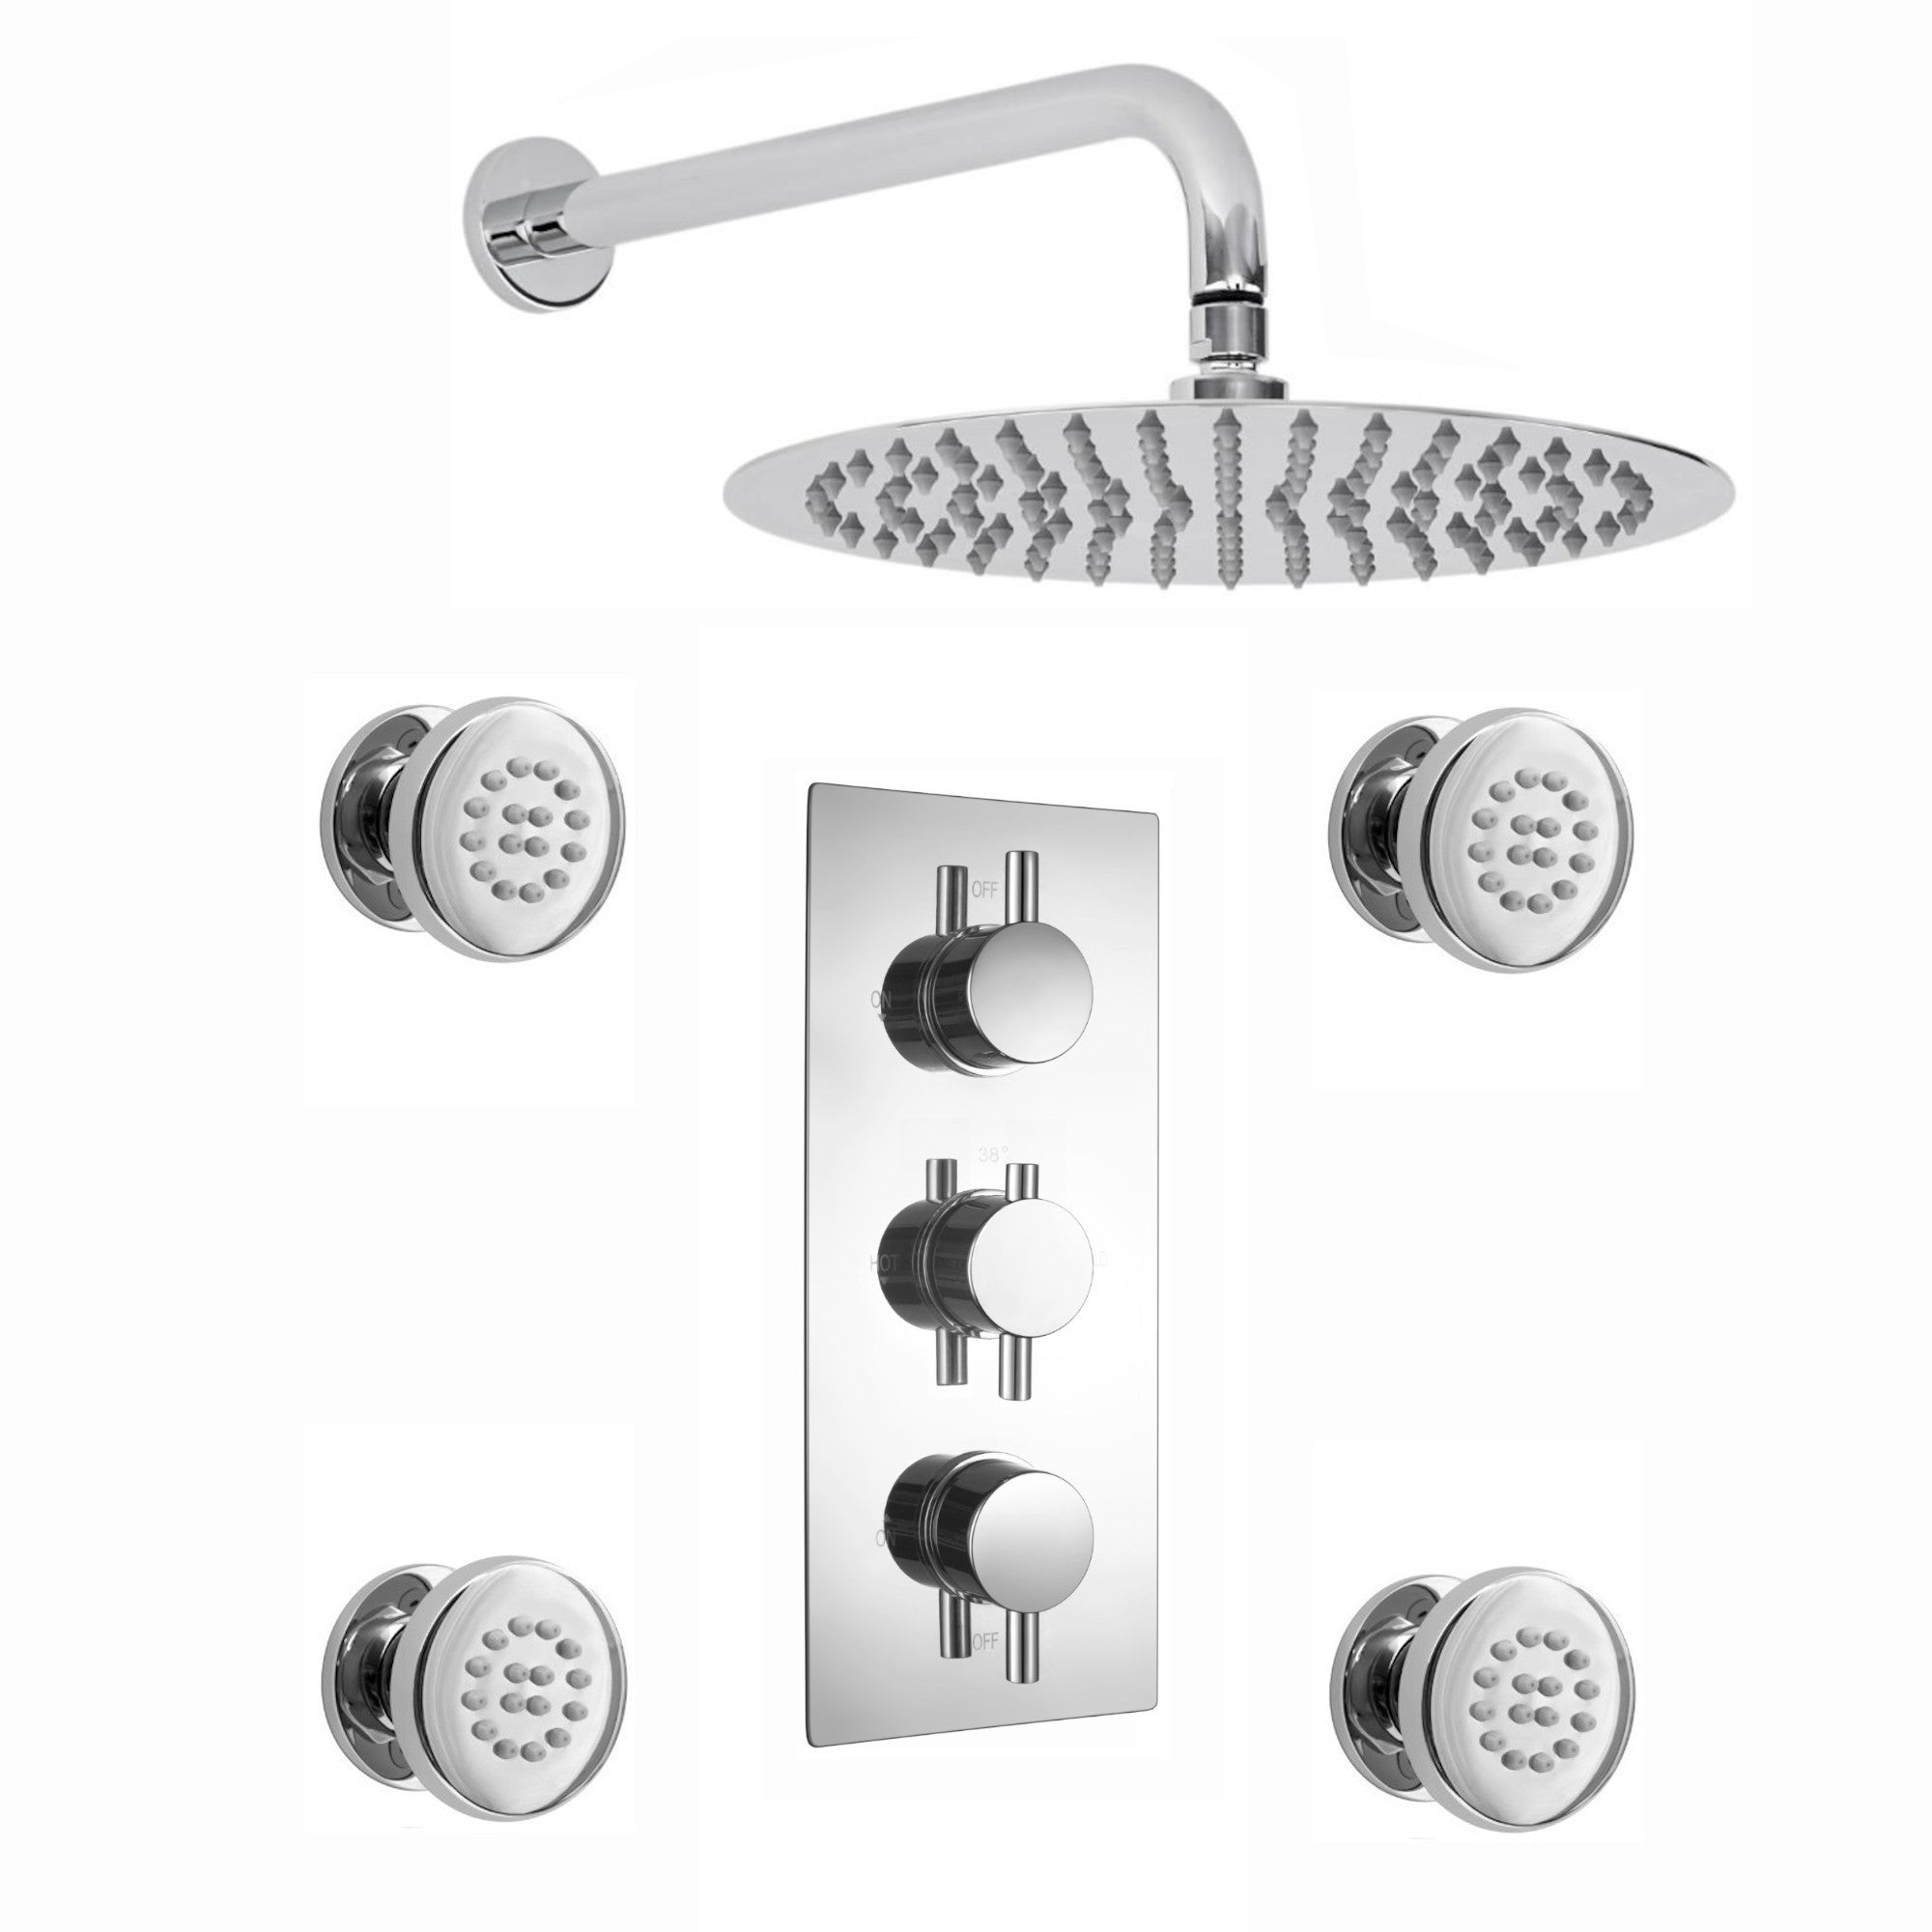 Venice Contemporary Round Concealed Thermostatic Shower Set Incl. Triple Valve, Wall Fixed 8" Shower Head, 4 Spa Body Jets - Chrome (2 Outlet)